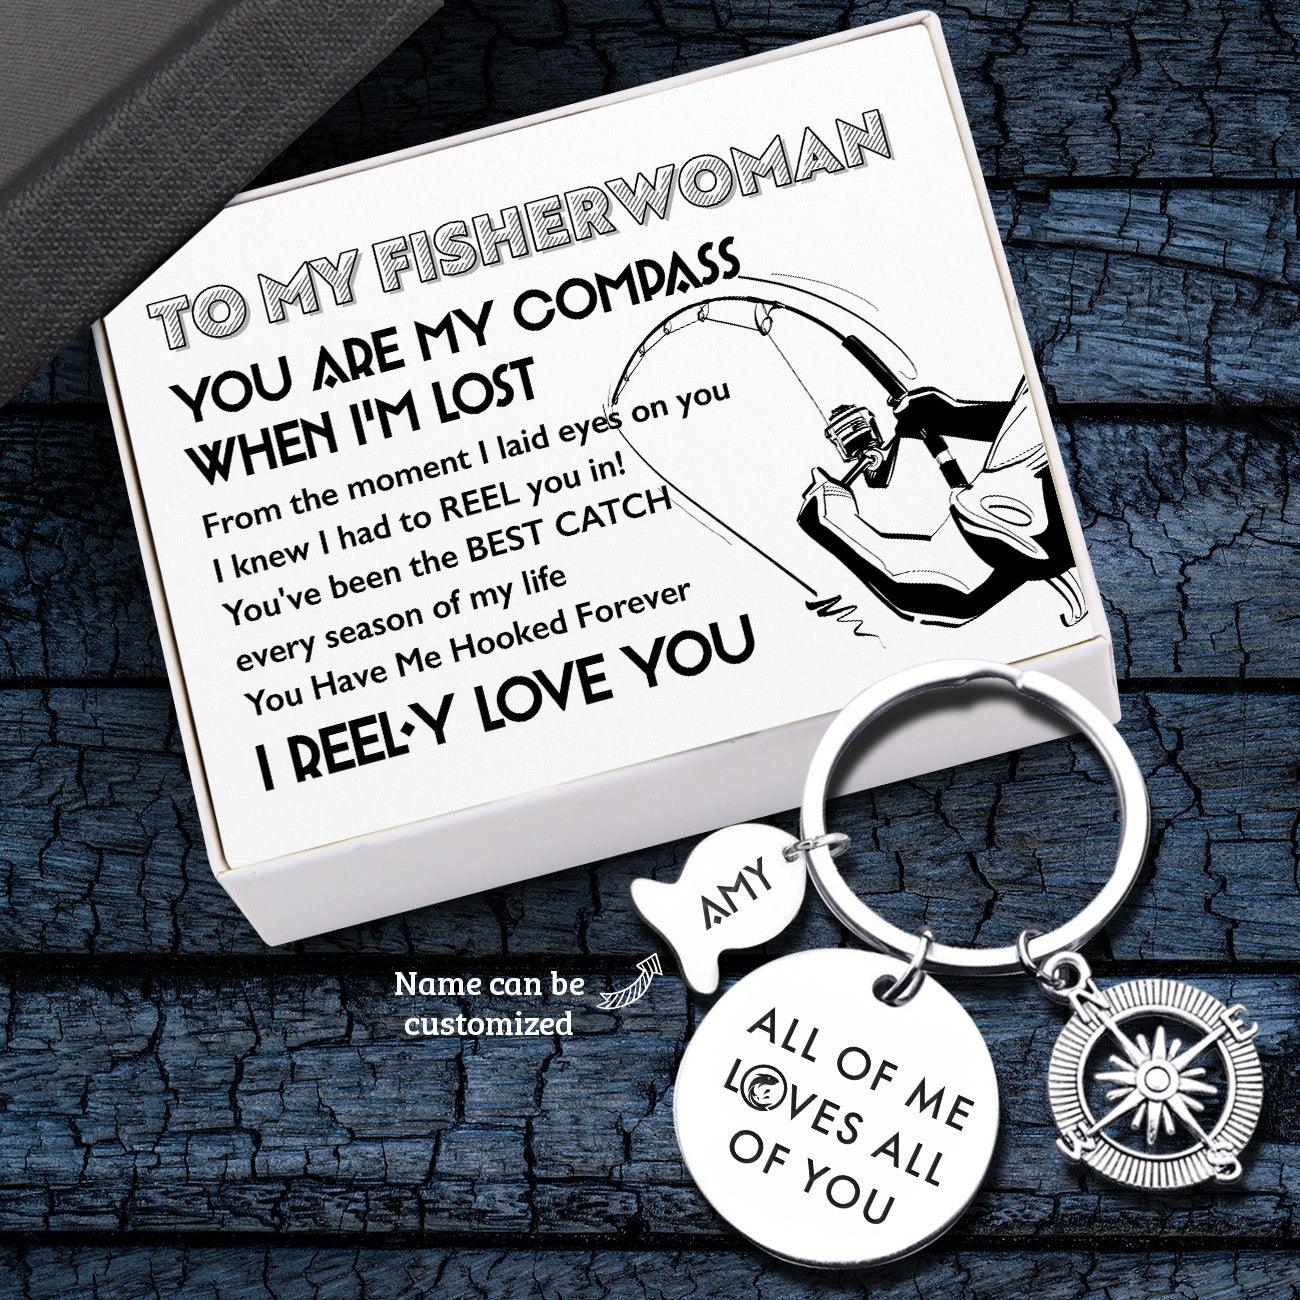 Personalised Fishing Compass Keychain - Fishing - To My Fisherwoman - I Reel-y Love You - Augkwb13004 - Gifts Holder